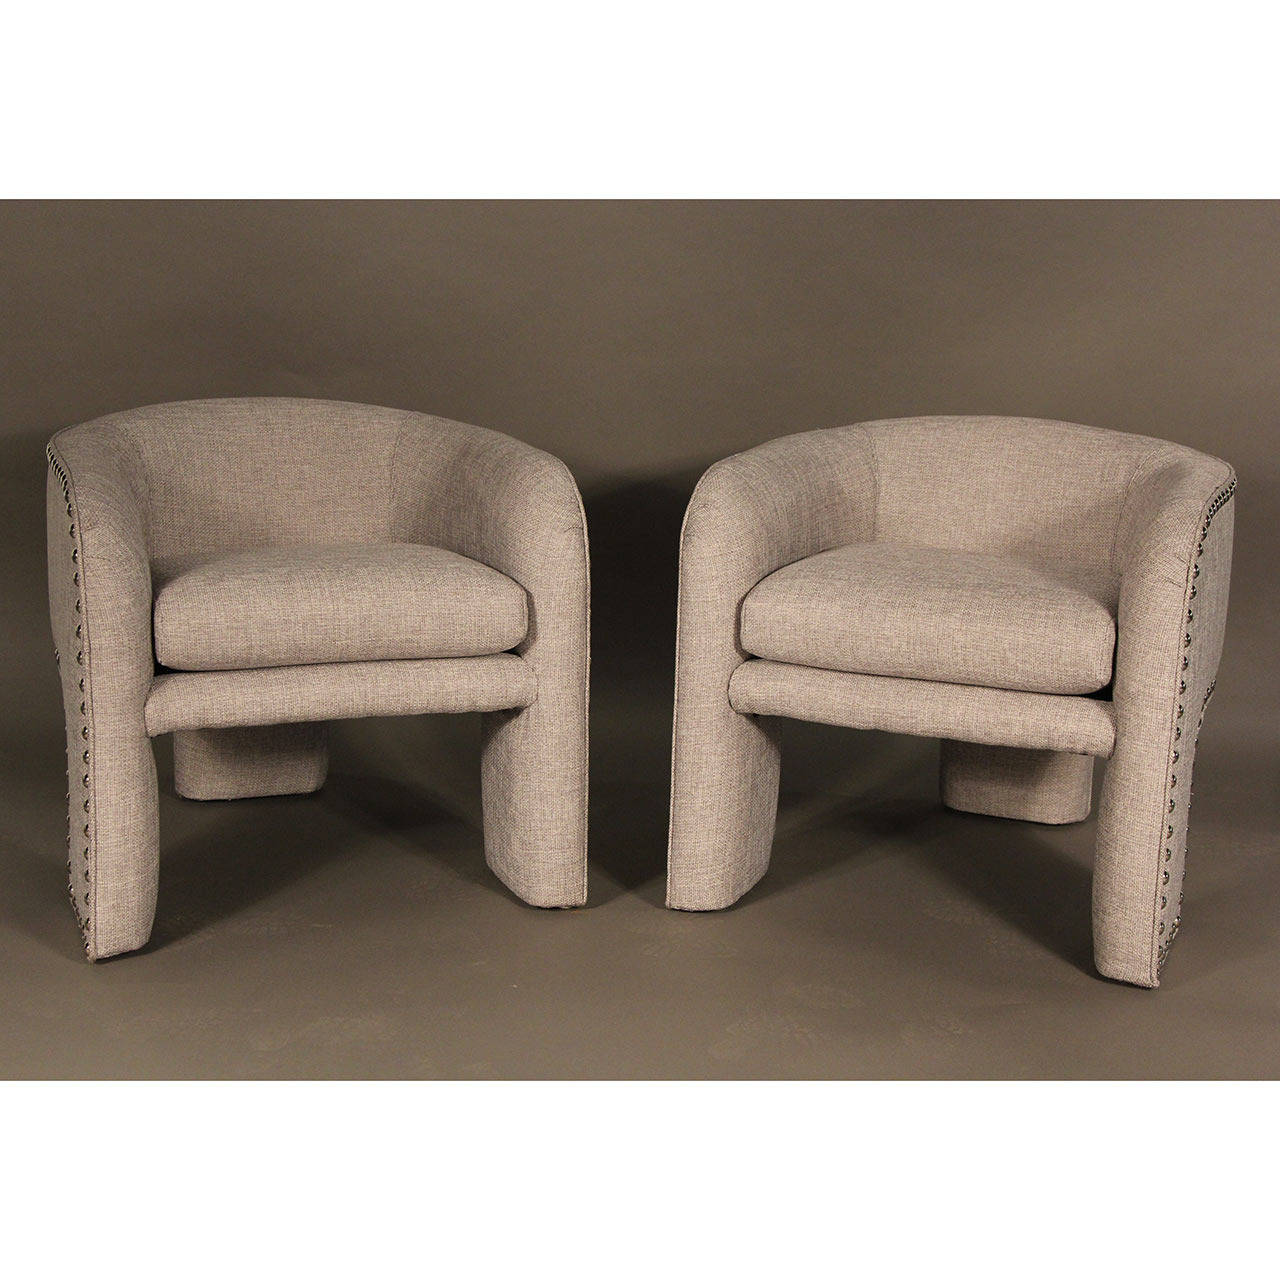 Done in silver and white cotton blend fabric, large nickel nailheads from the 1980s produced by Preview Furniture Slight variation in form with more curves employed as well as back cushioning. Tagged Preview.